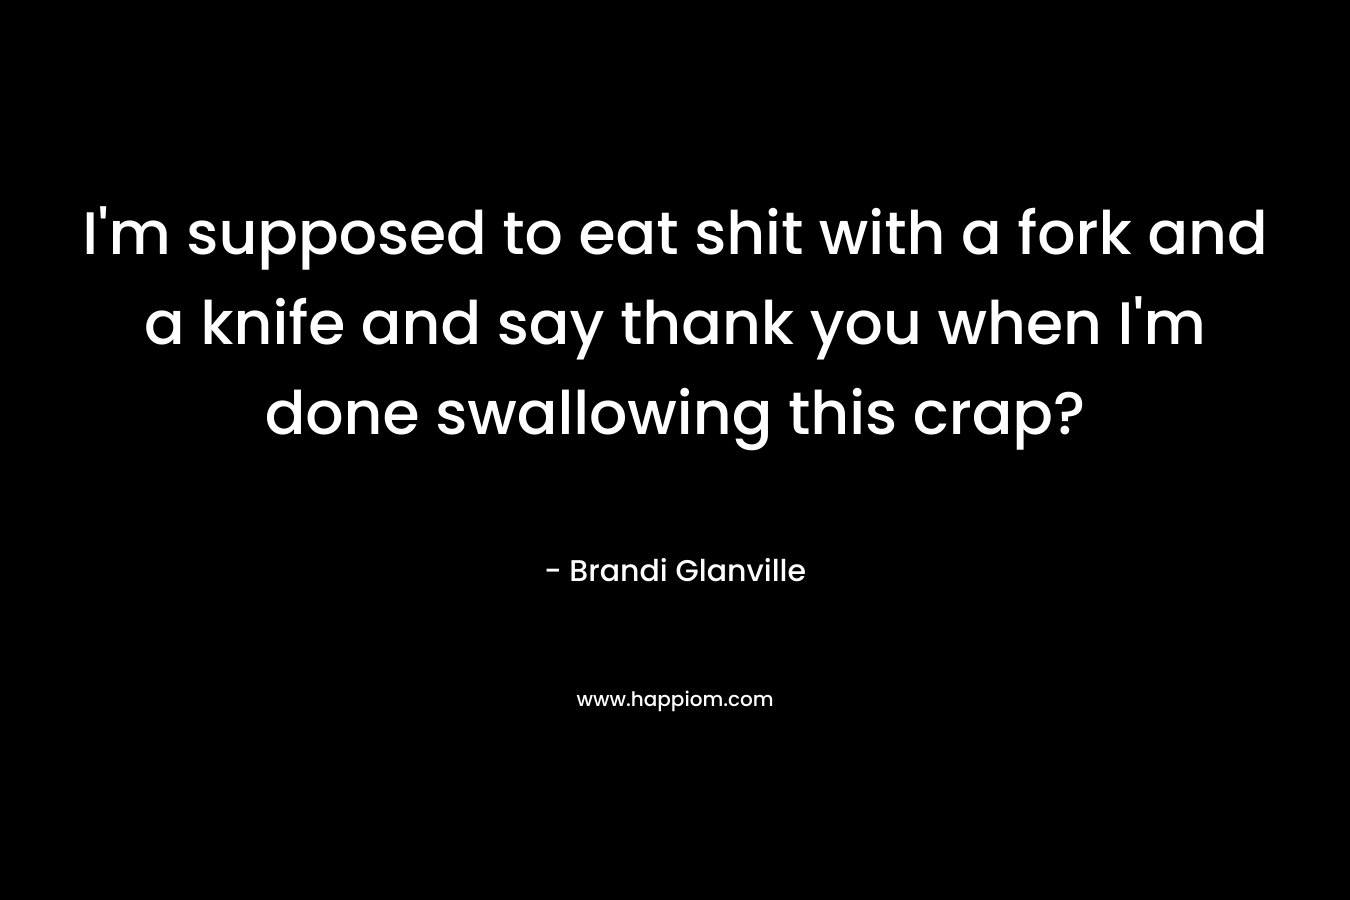 I’m supposed to eat shit with a fork and a knife and say thank you when I’m done swallowing this crap? – Brandi Glanville